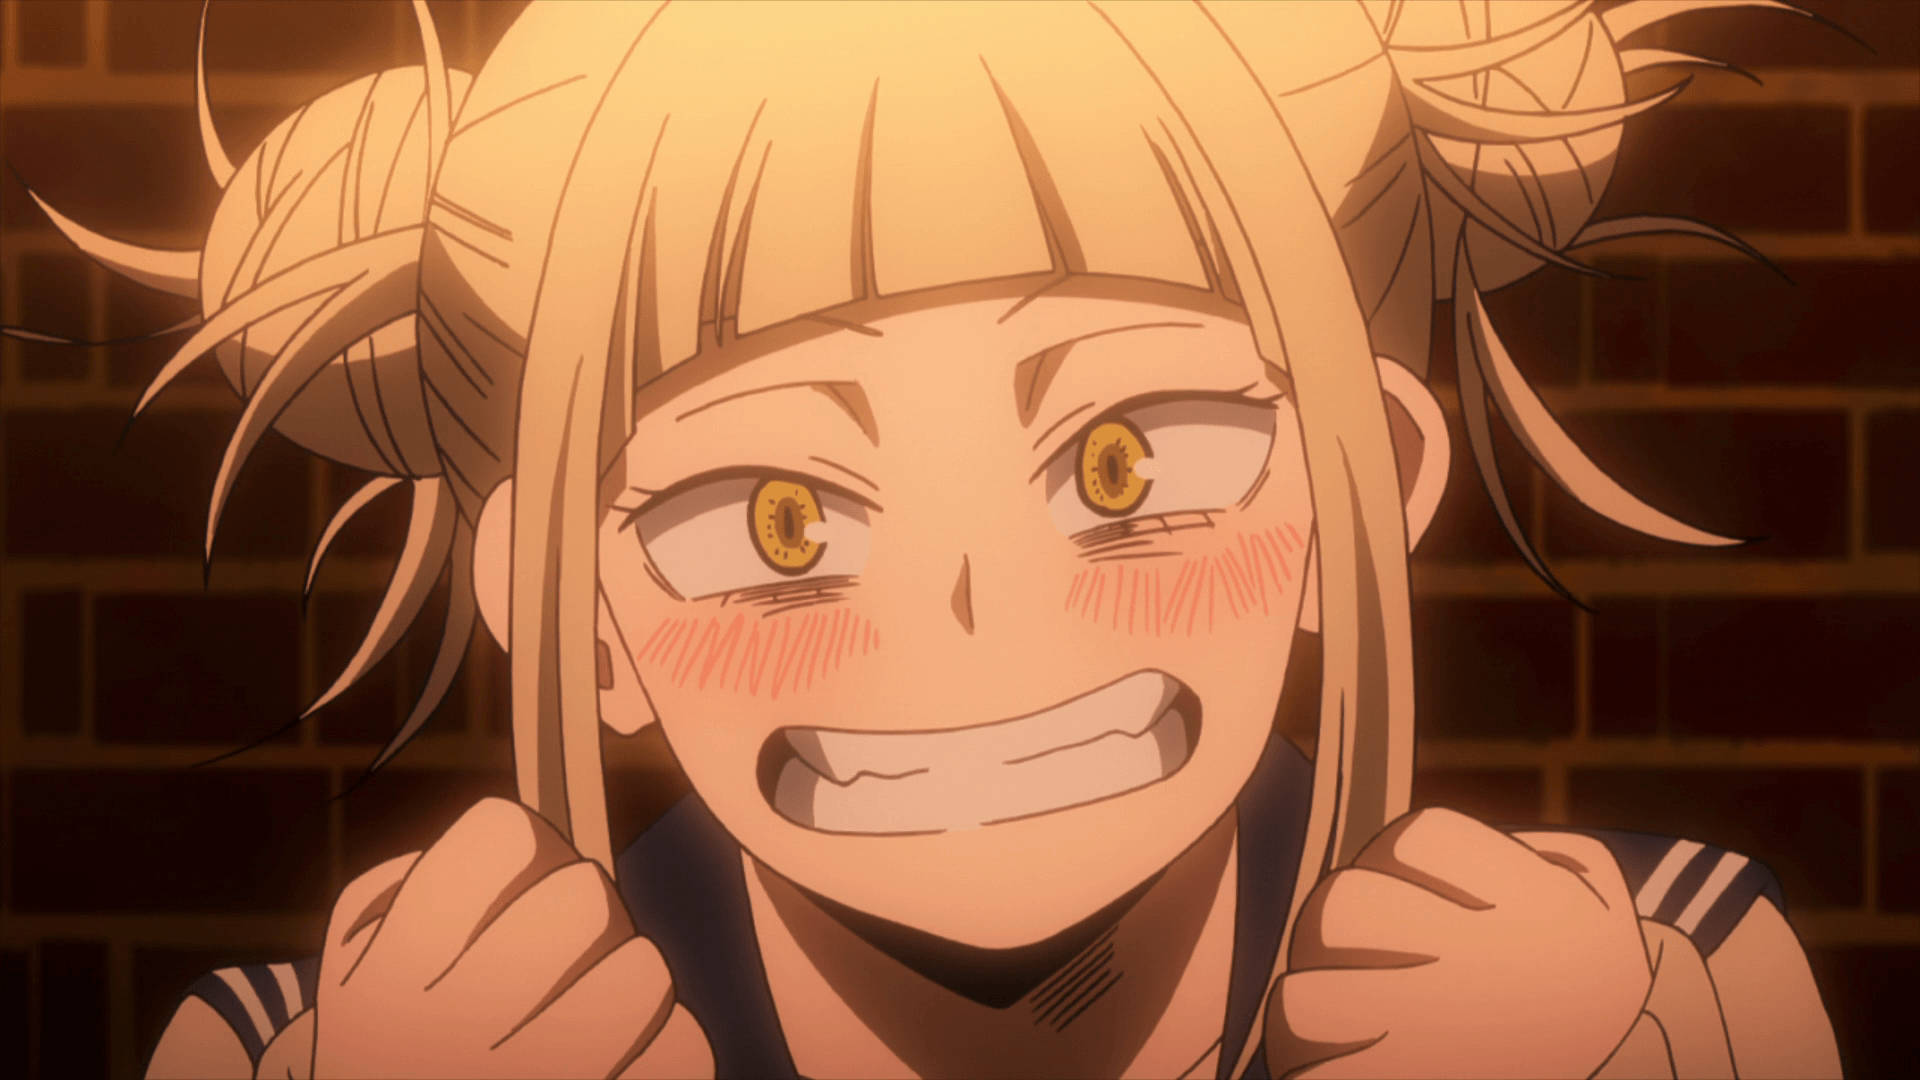 1920X1080 Himiko Toga Wallpaper and Background